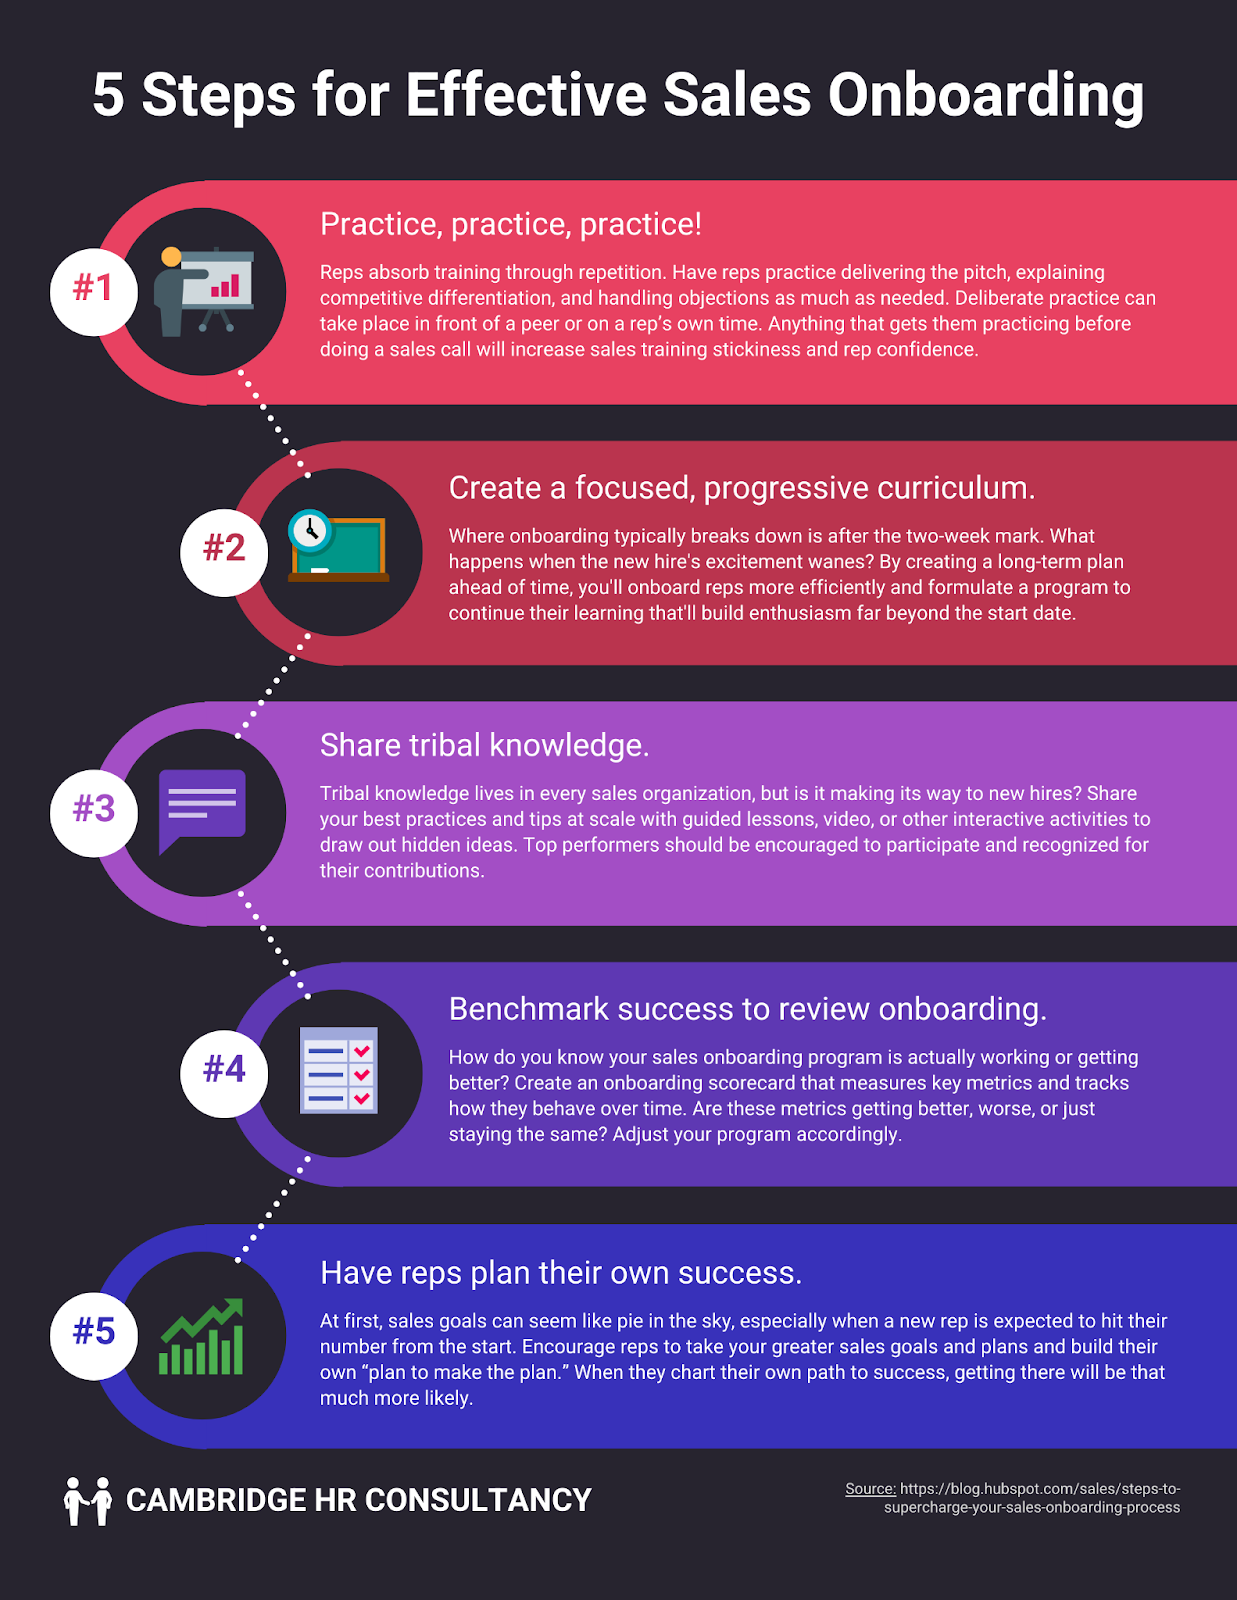 5 Steps for Sales Onboarding Process Infographic